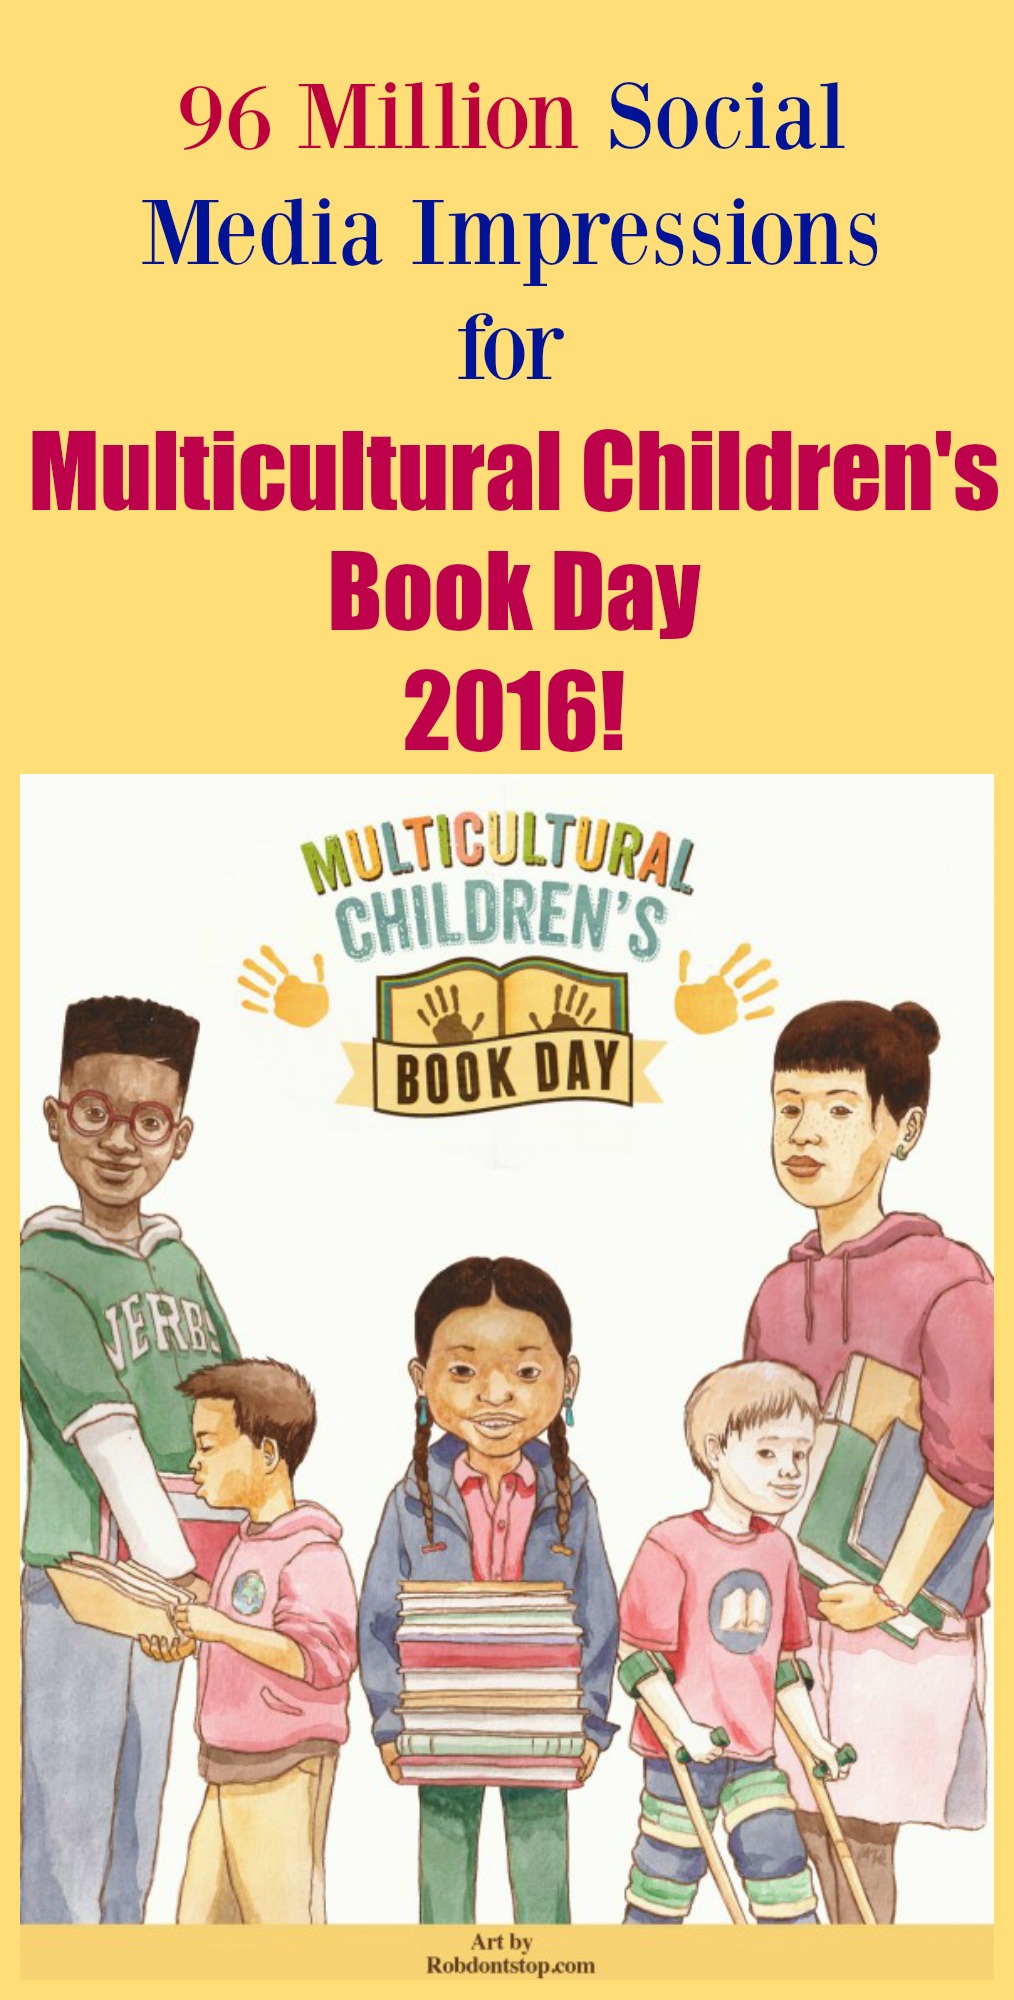 Multicultural Children's Book Day 2016 Stats